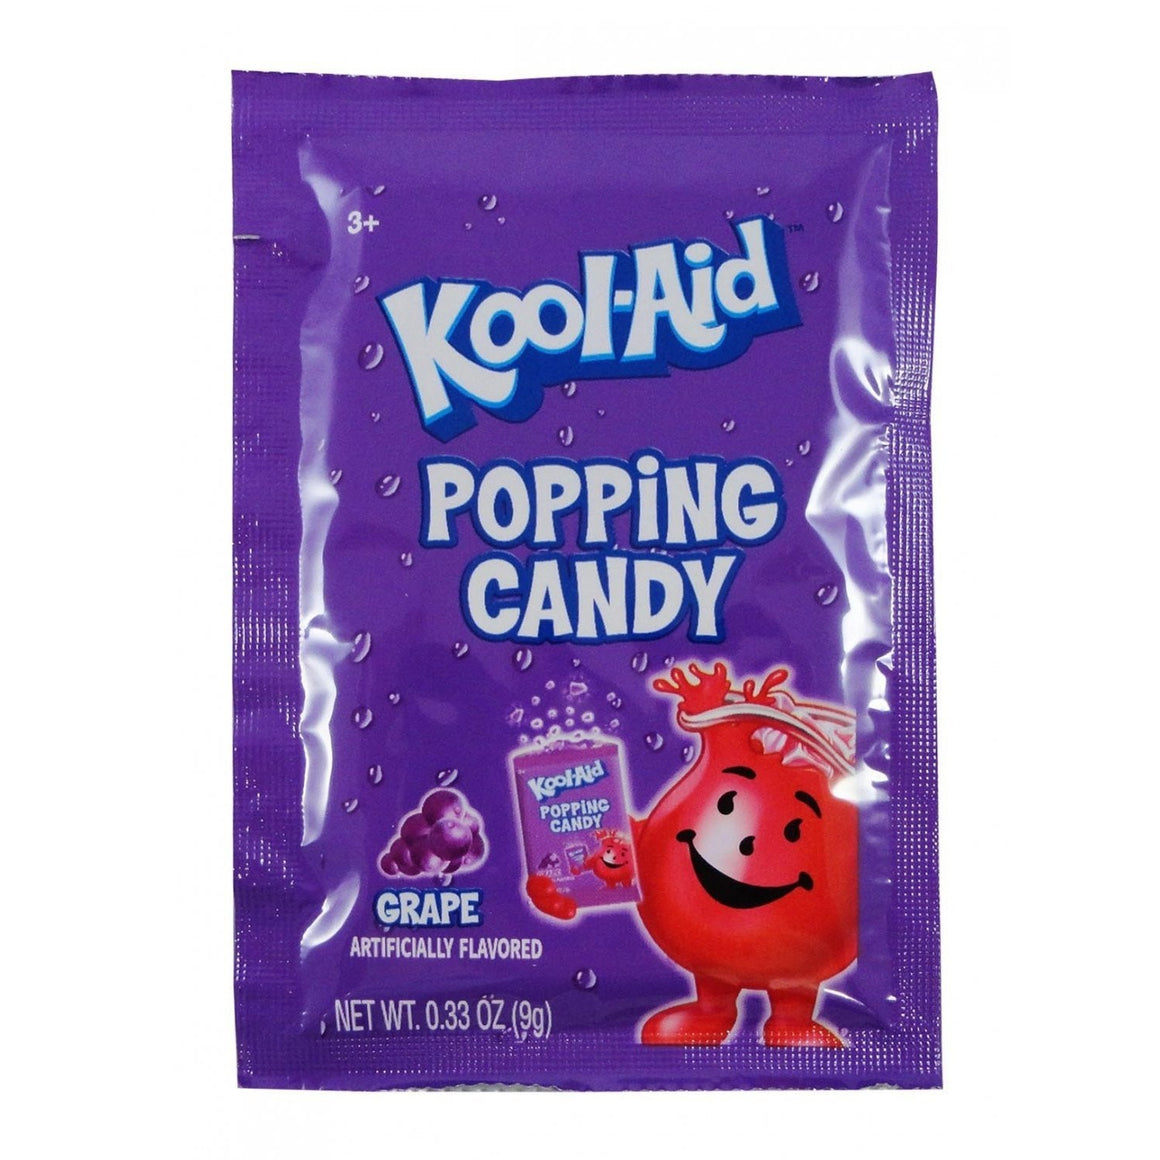 All City Candy Kool-Aid Popping Candy Grape 0.33 oz. Pouch 1 Pouch Novelty Hilco For fresh candy and great service, visit www.allcitycandy.com